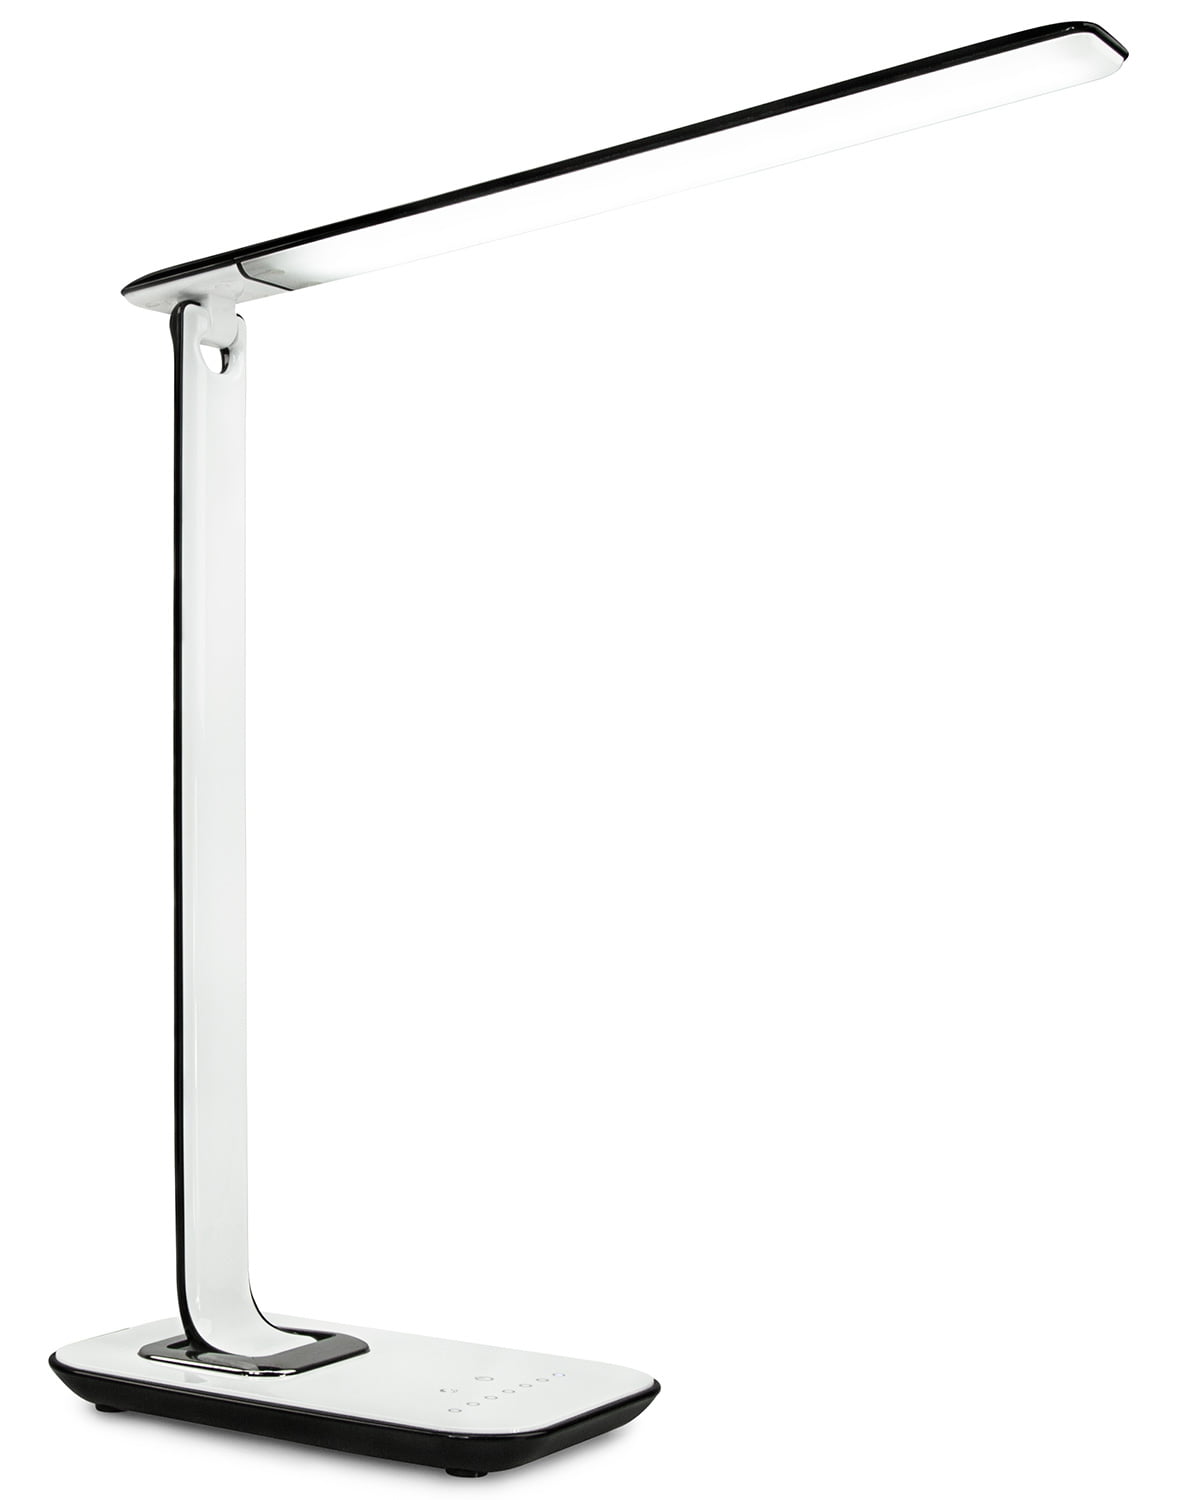 Turcom Dimmable LED Desk Lamp with USB Ports for Chargers ...